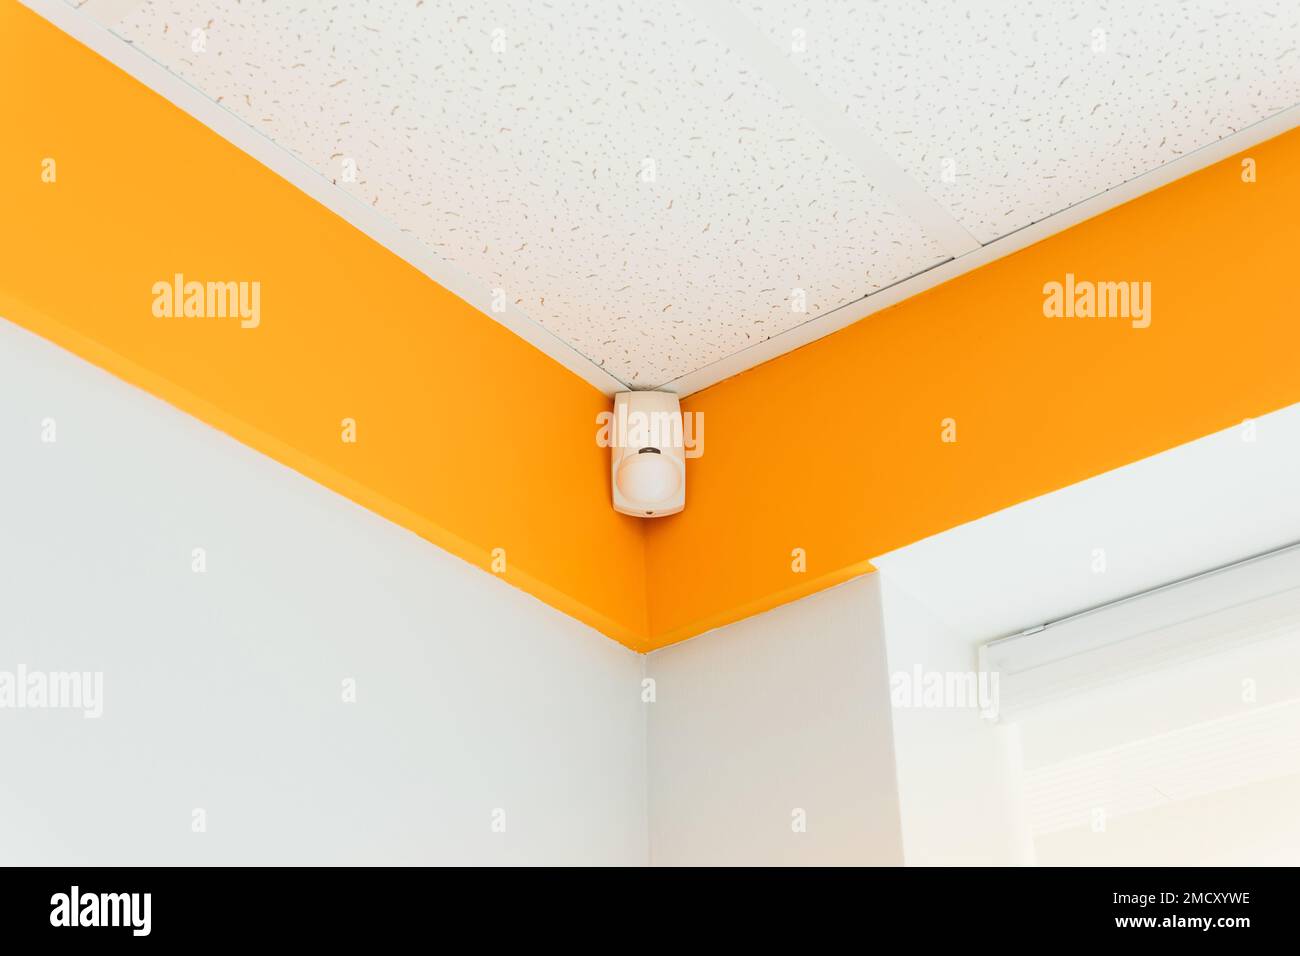 Combined motion or glass break sensor detector for security system mounted on wall in a hospital or house.  Stock Photo